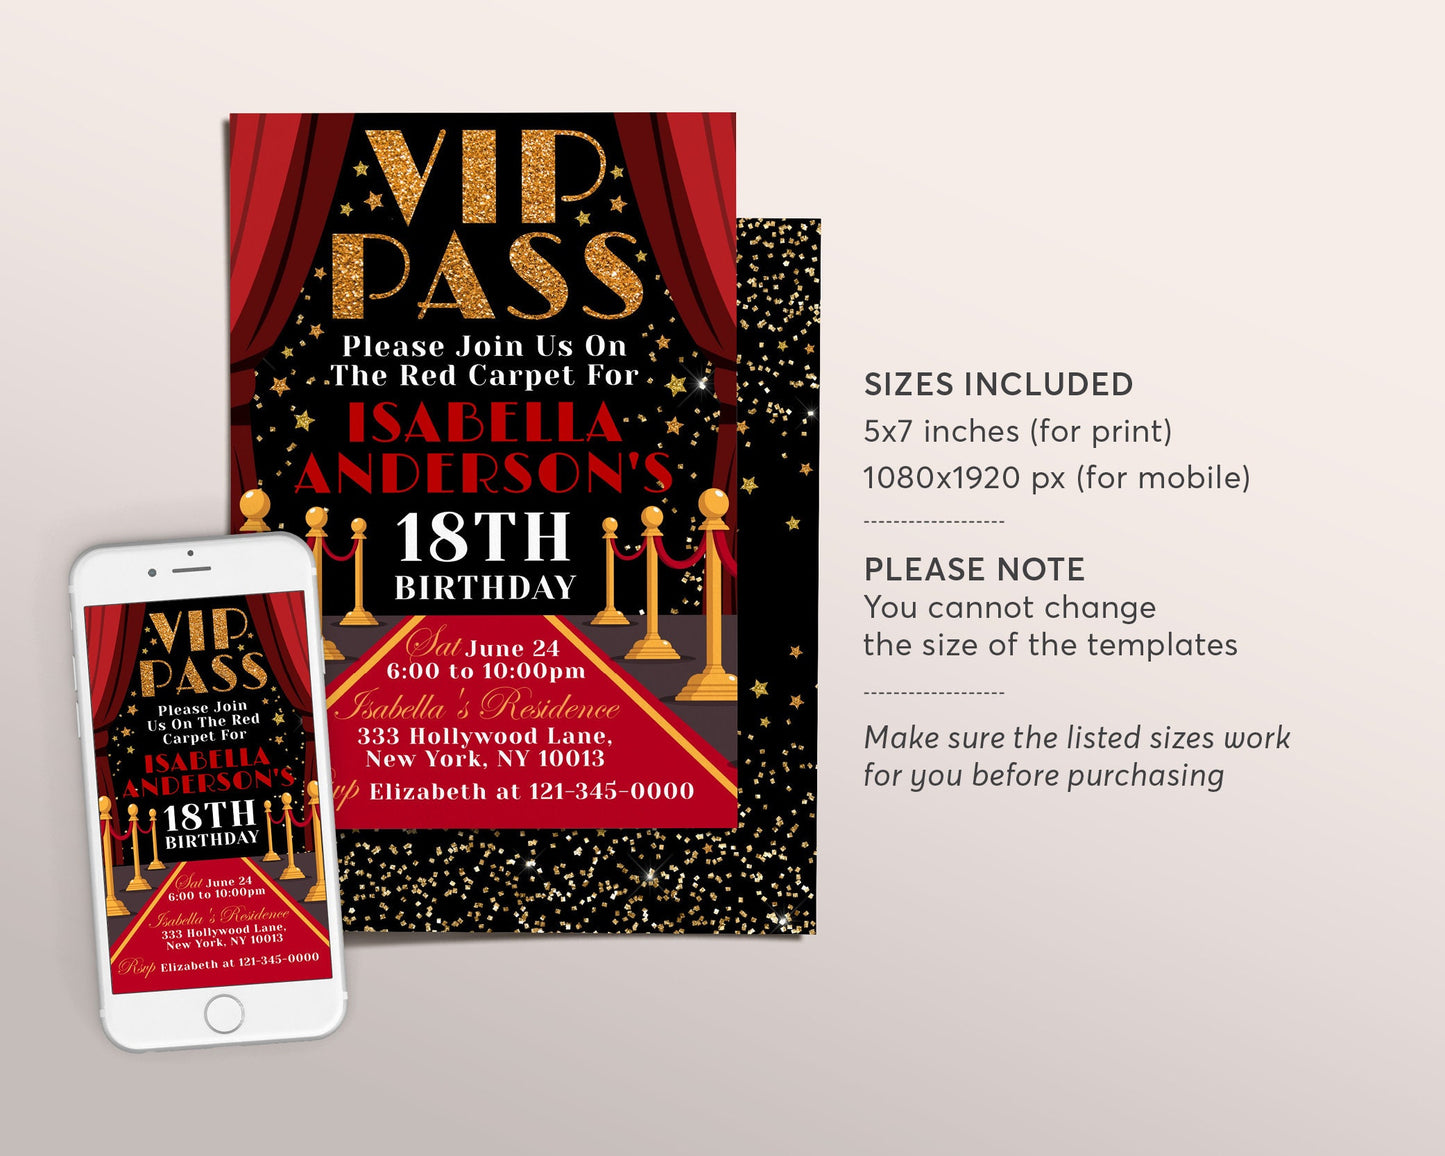 VIP Pass Birthday Invitation Editable Template, Hollywood Red Carpet Invite, Movie Star Glam Party Quinceanera, 18th Birthday Gold Black Red